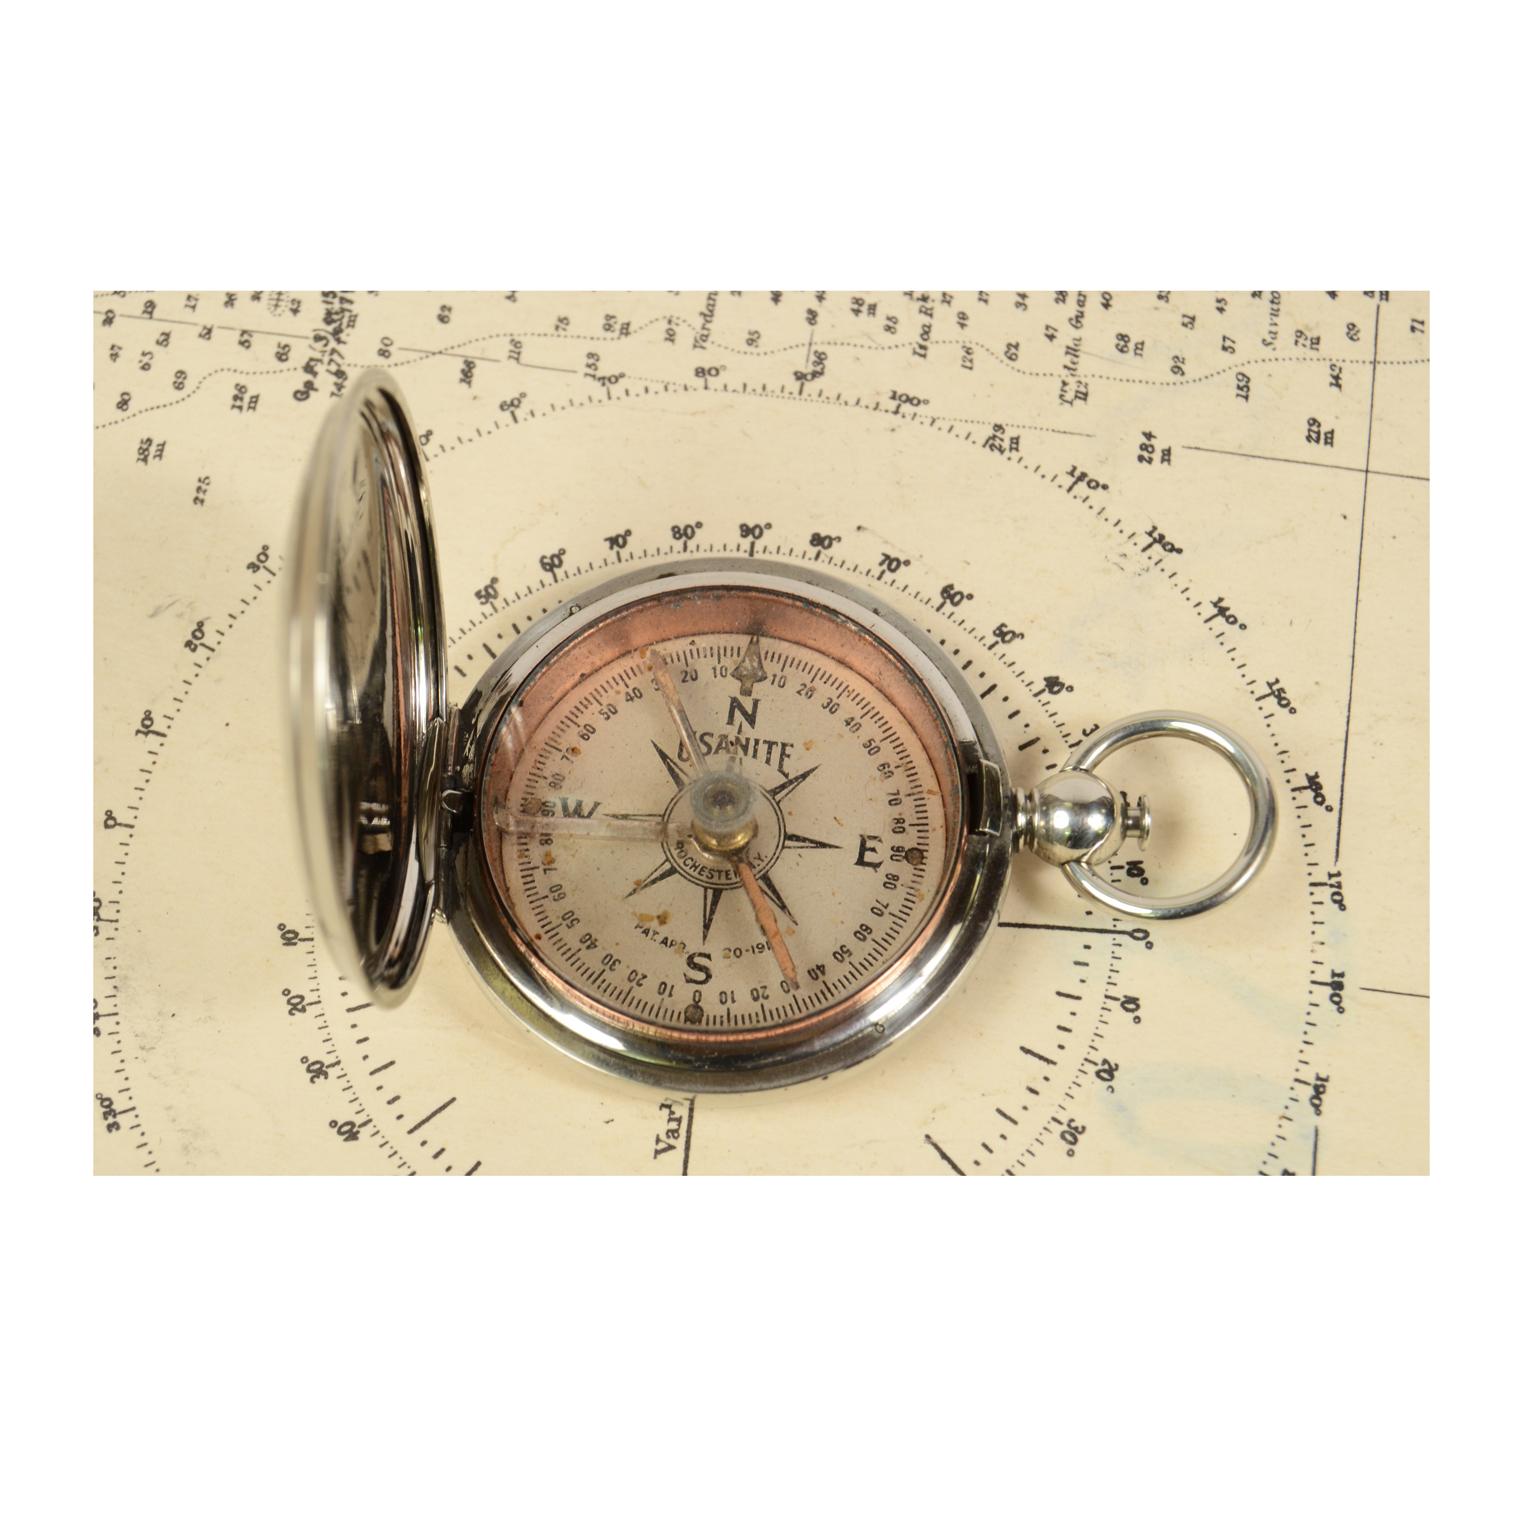 Small travel compass of chromed brass, supplied to the US army during the First World War, on the lid you read Eng: Dept U.S.A. 1918, in the shape of a pocket watch, an instrument consisting of a magnetized needle free to rotate on a horizontal